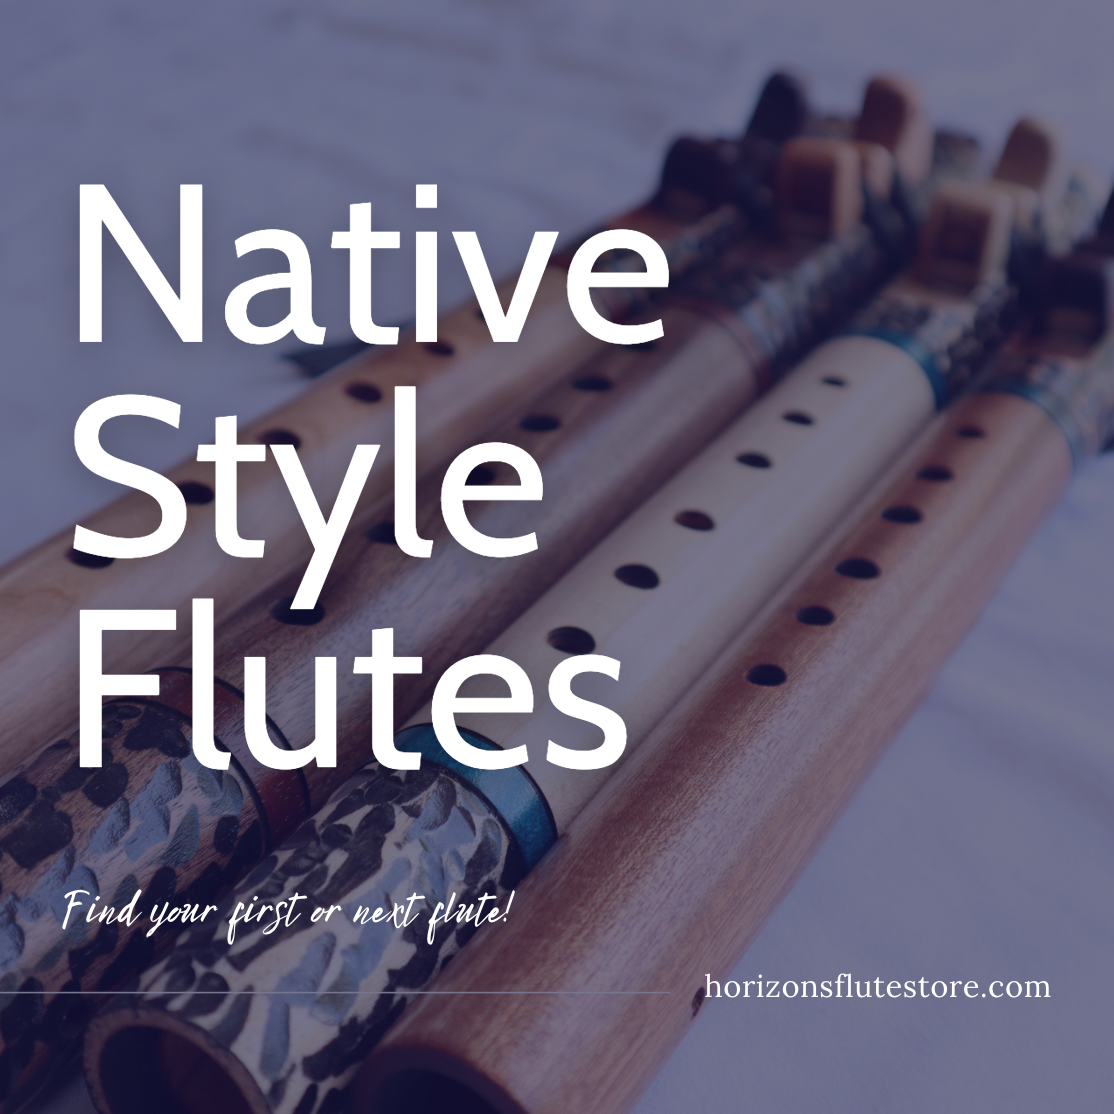 A variety of native american style flutes shown from cedar and walnut. Flutes are also available from other materials such as "bamboo flutes" and "wooden flutes"